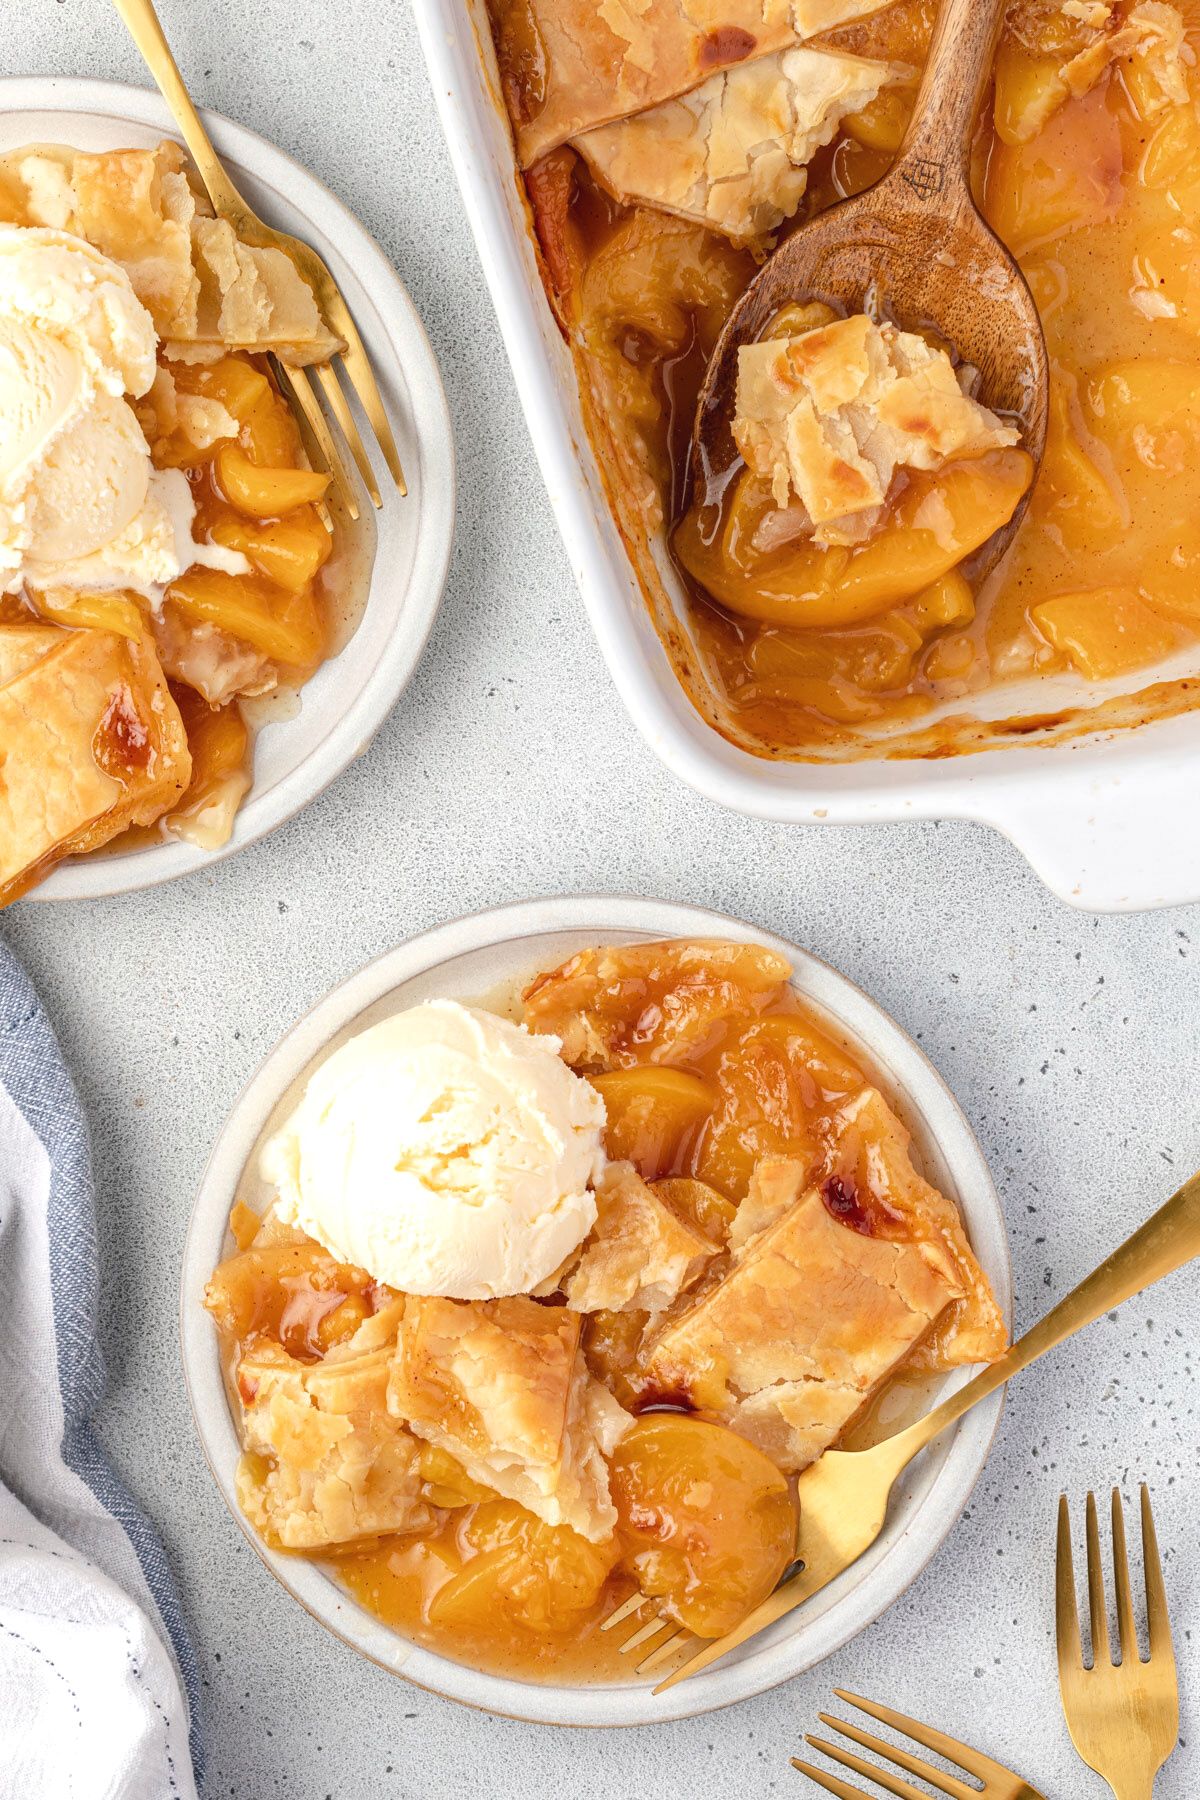 Overhead of 2 plates of peach cobbler with ice cream on top and gold forks, and corner showing of the pan of cobbler.